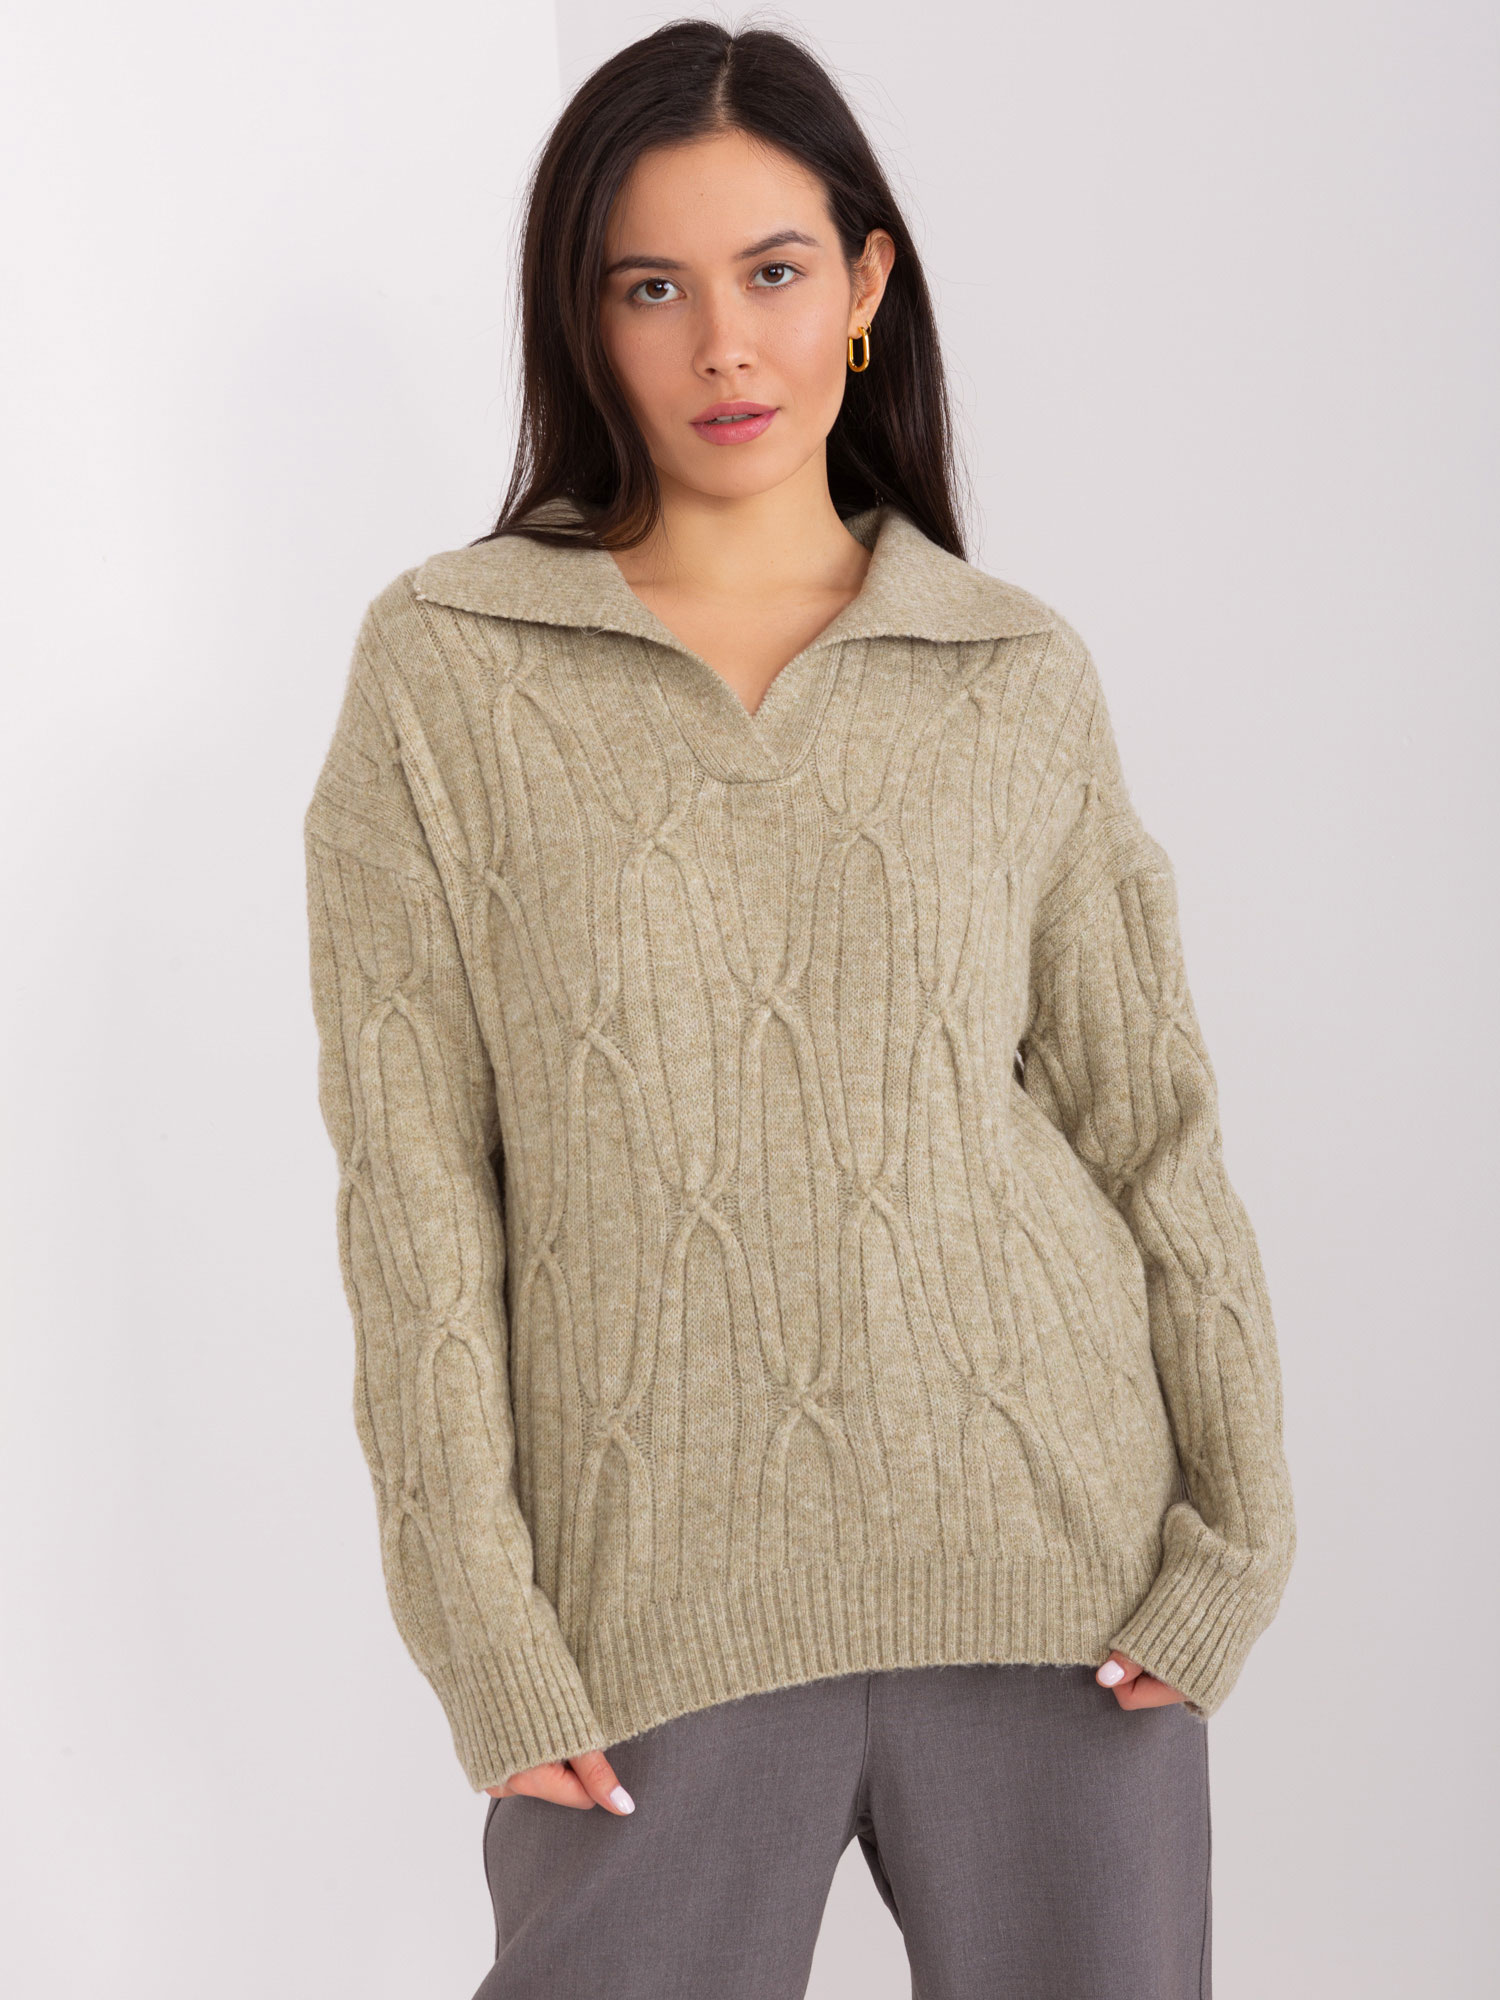 Khaki women's sweater with cables and collar